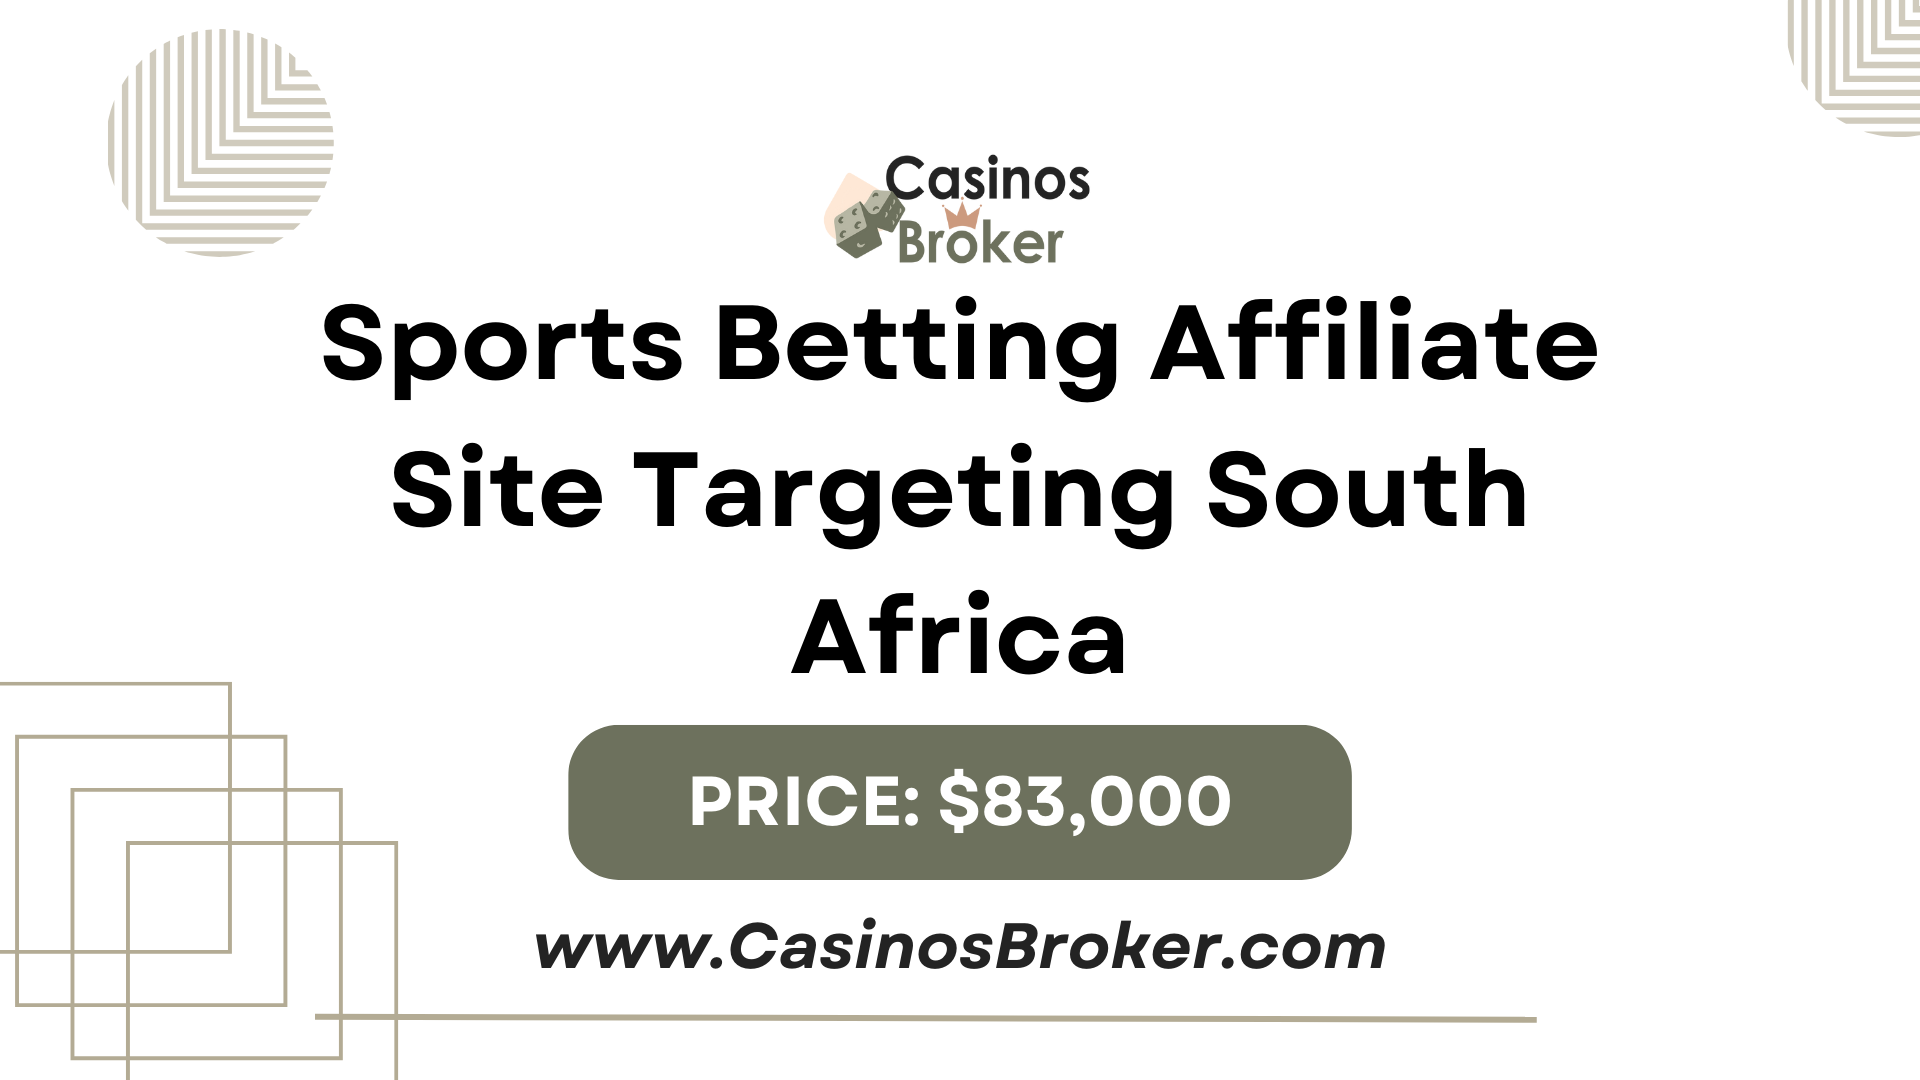 Sports Betting Affiliate Site Targeting South Africa